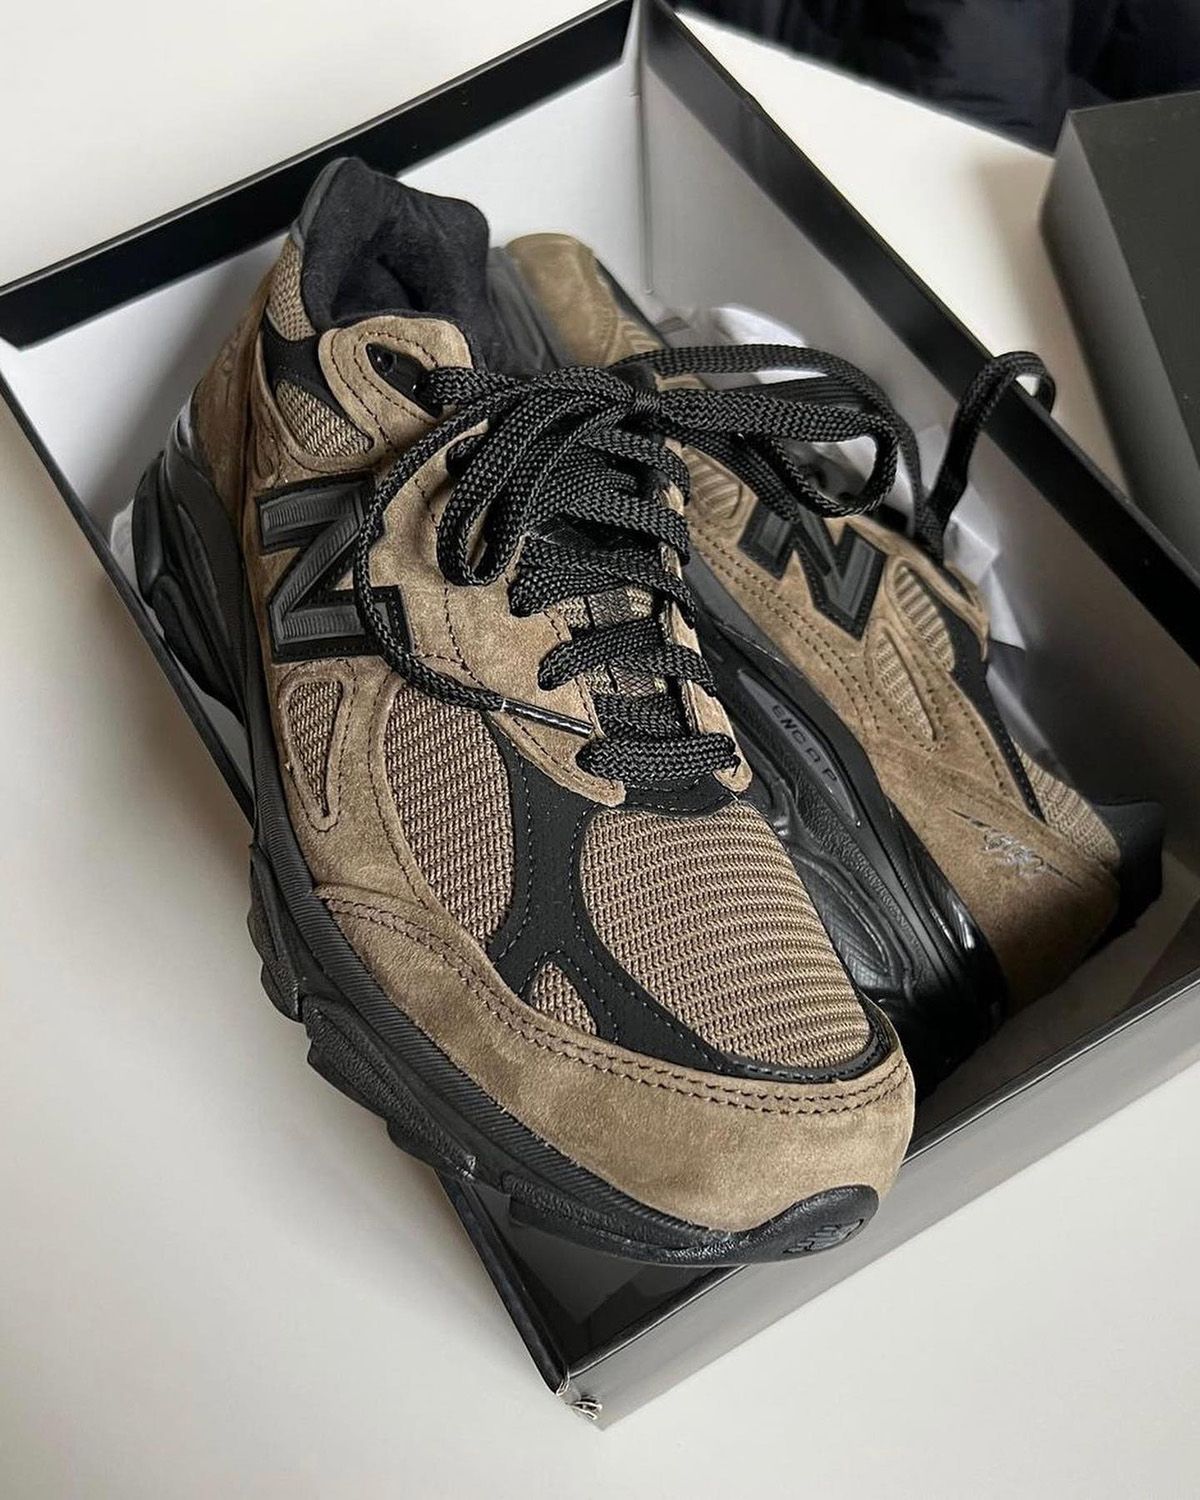 Another JJJJound x New Balance 990v3 Appears in Brown and Black